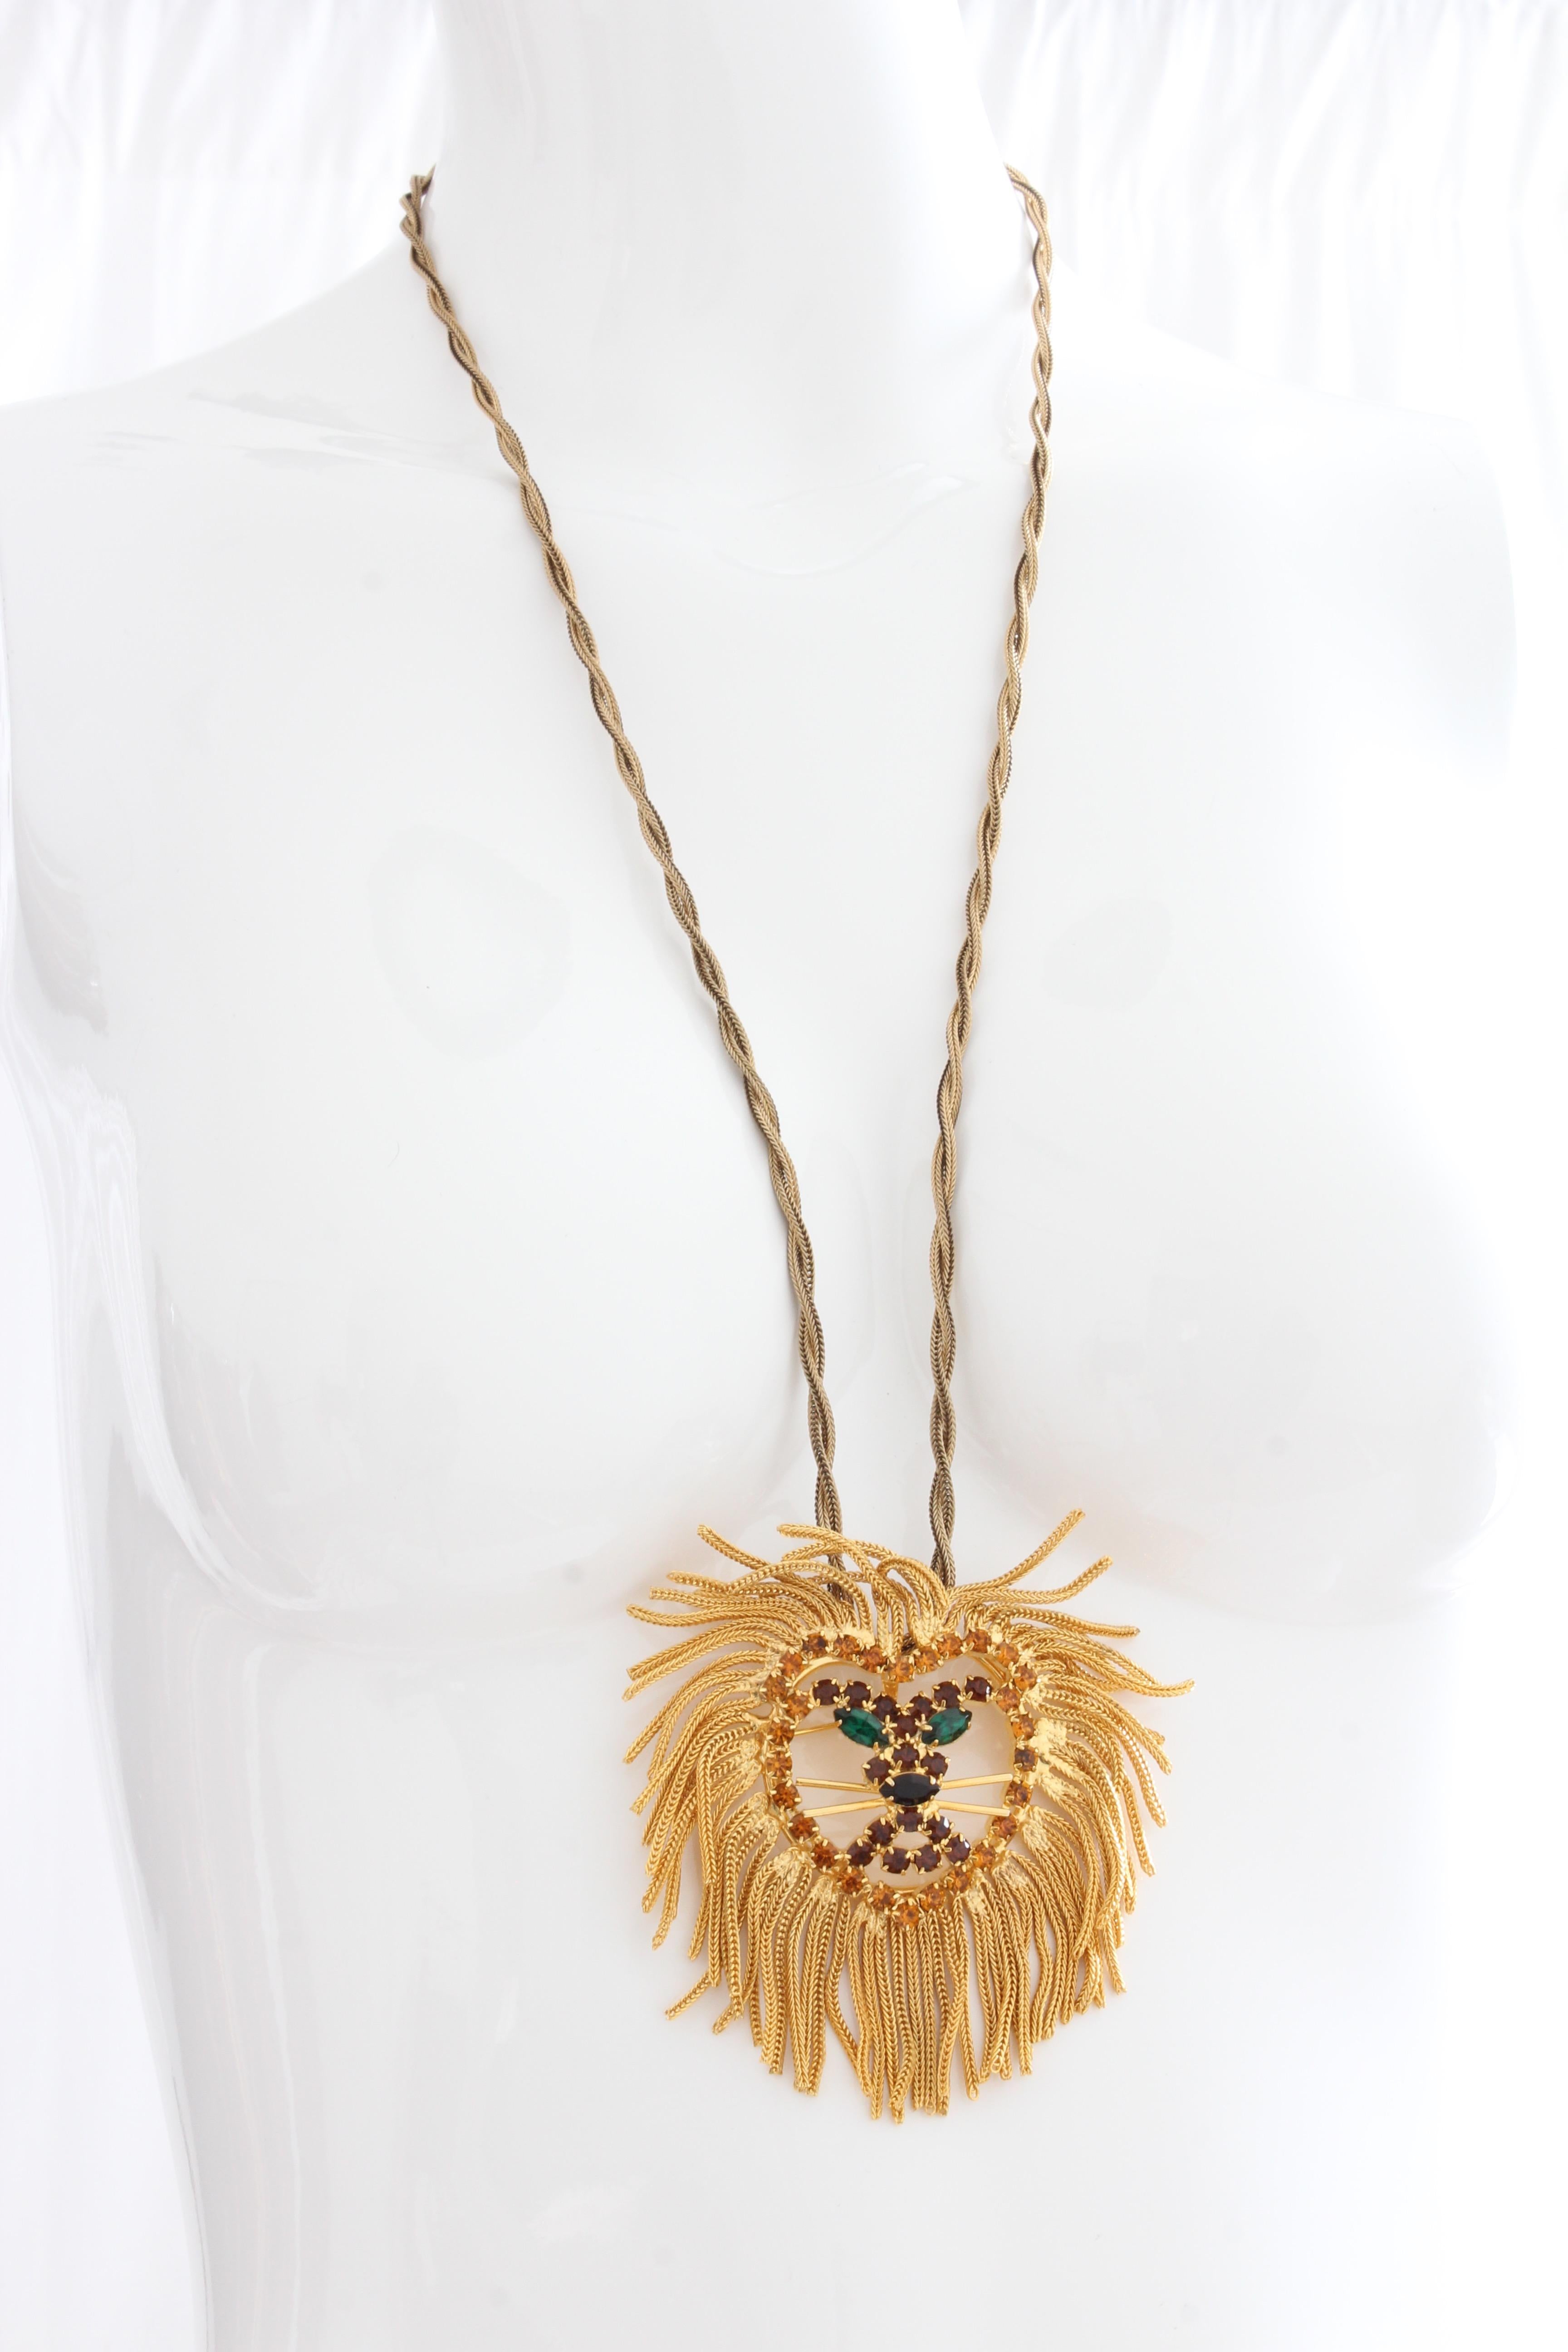 Large Lion Head Brooch Pendant Necklace with Gems In The Style of Dominique  2